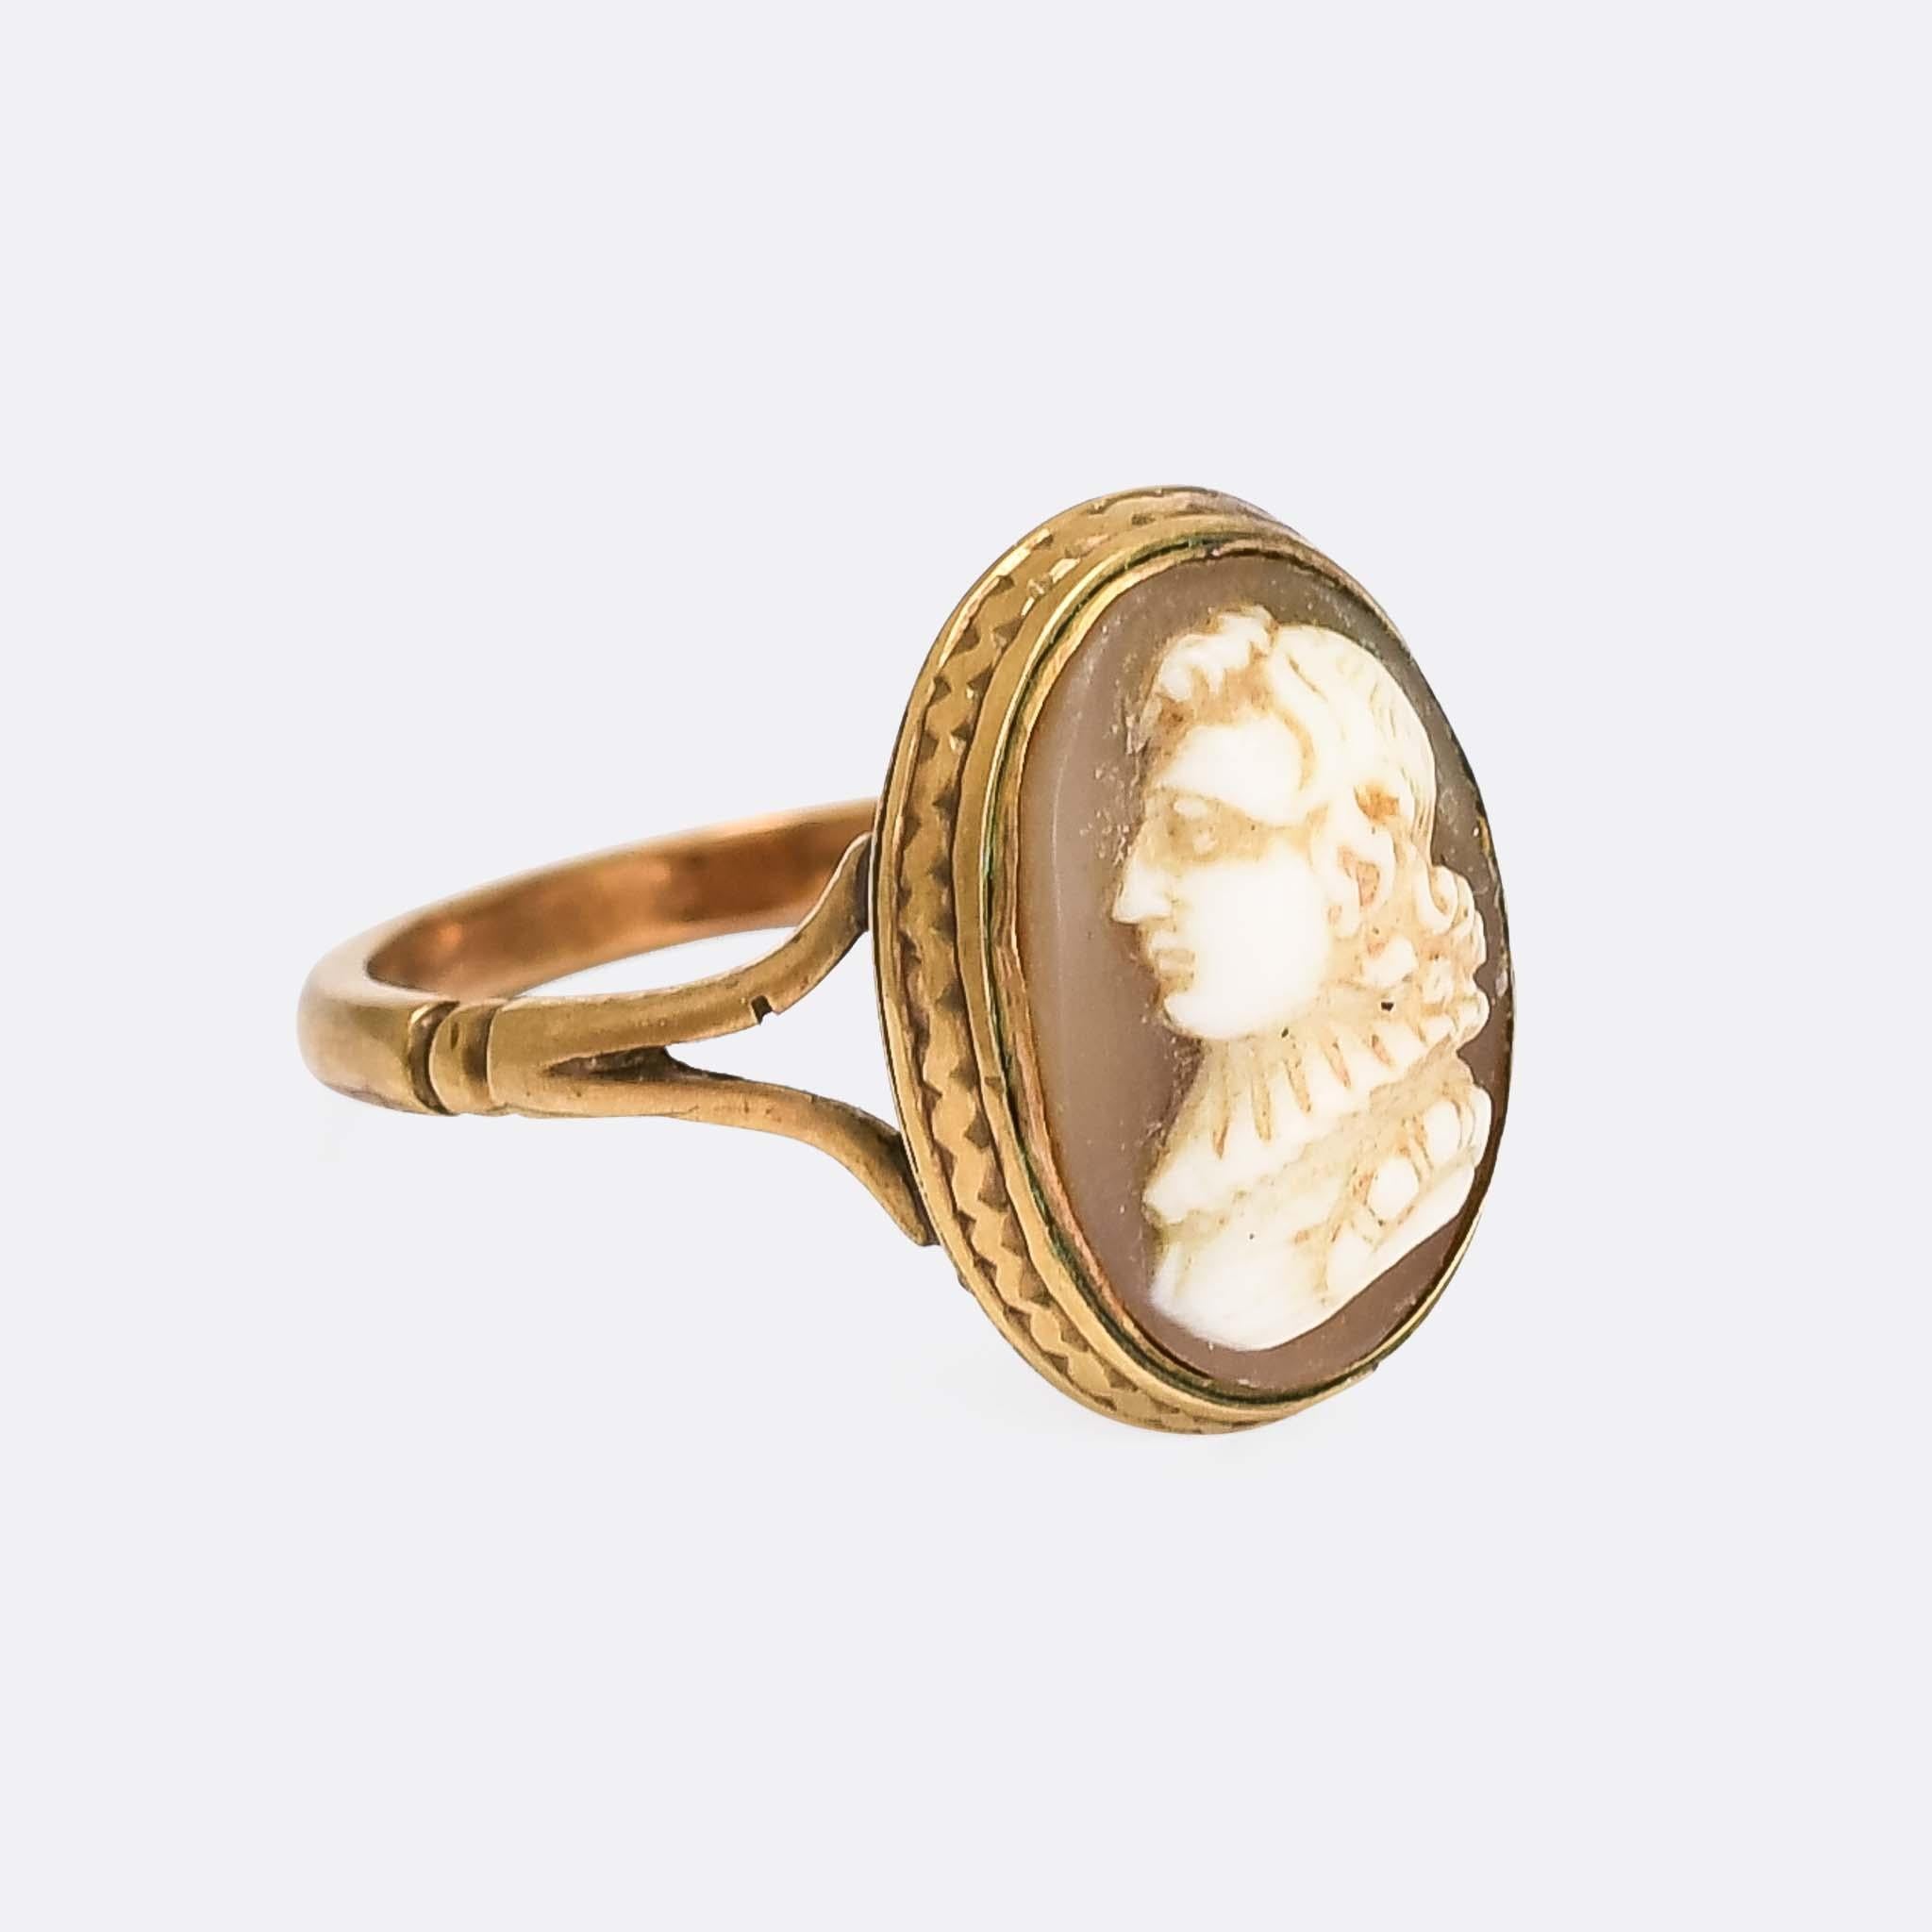 A cool Georgian cameo ring depicting John Milton. Milton was an English poet and intellectual who served as a civil servant in the Commonwealth of England under Oliver Cromwell. He's obviously best known for his epic poem Paradise lost, written at a